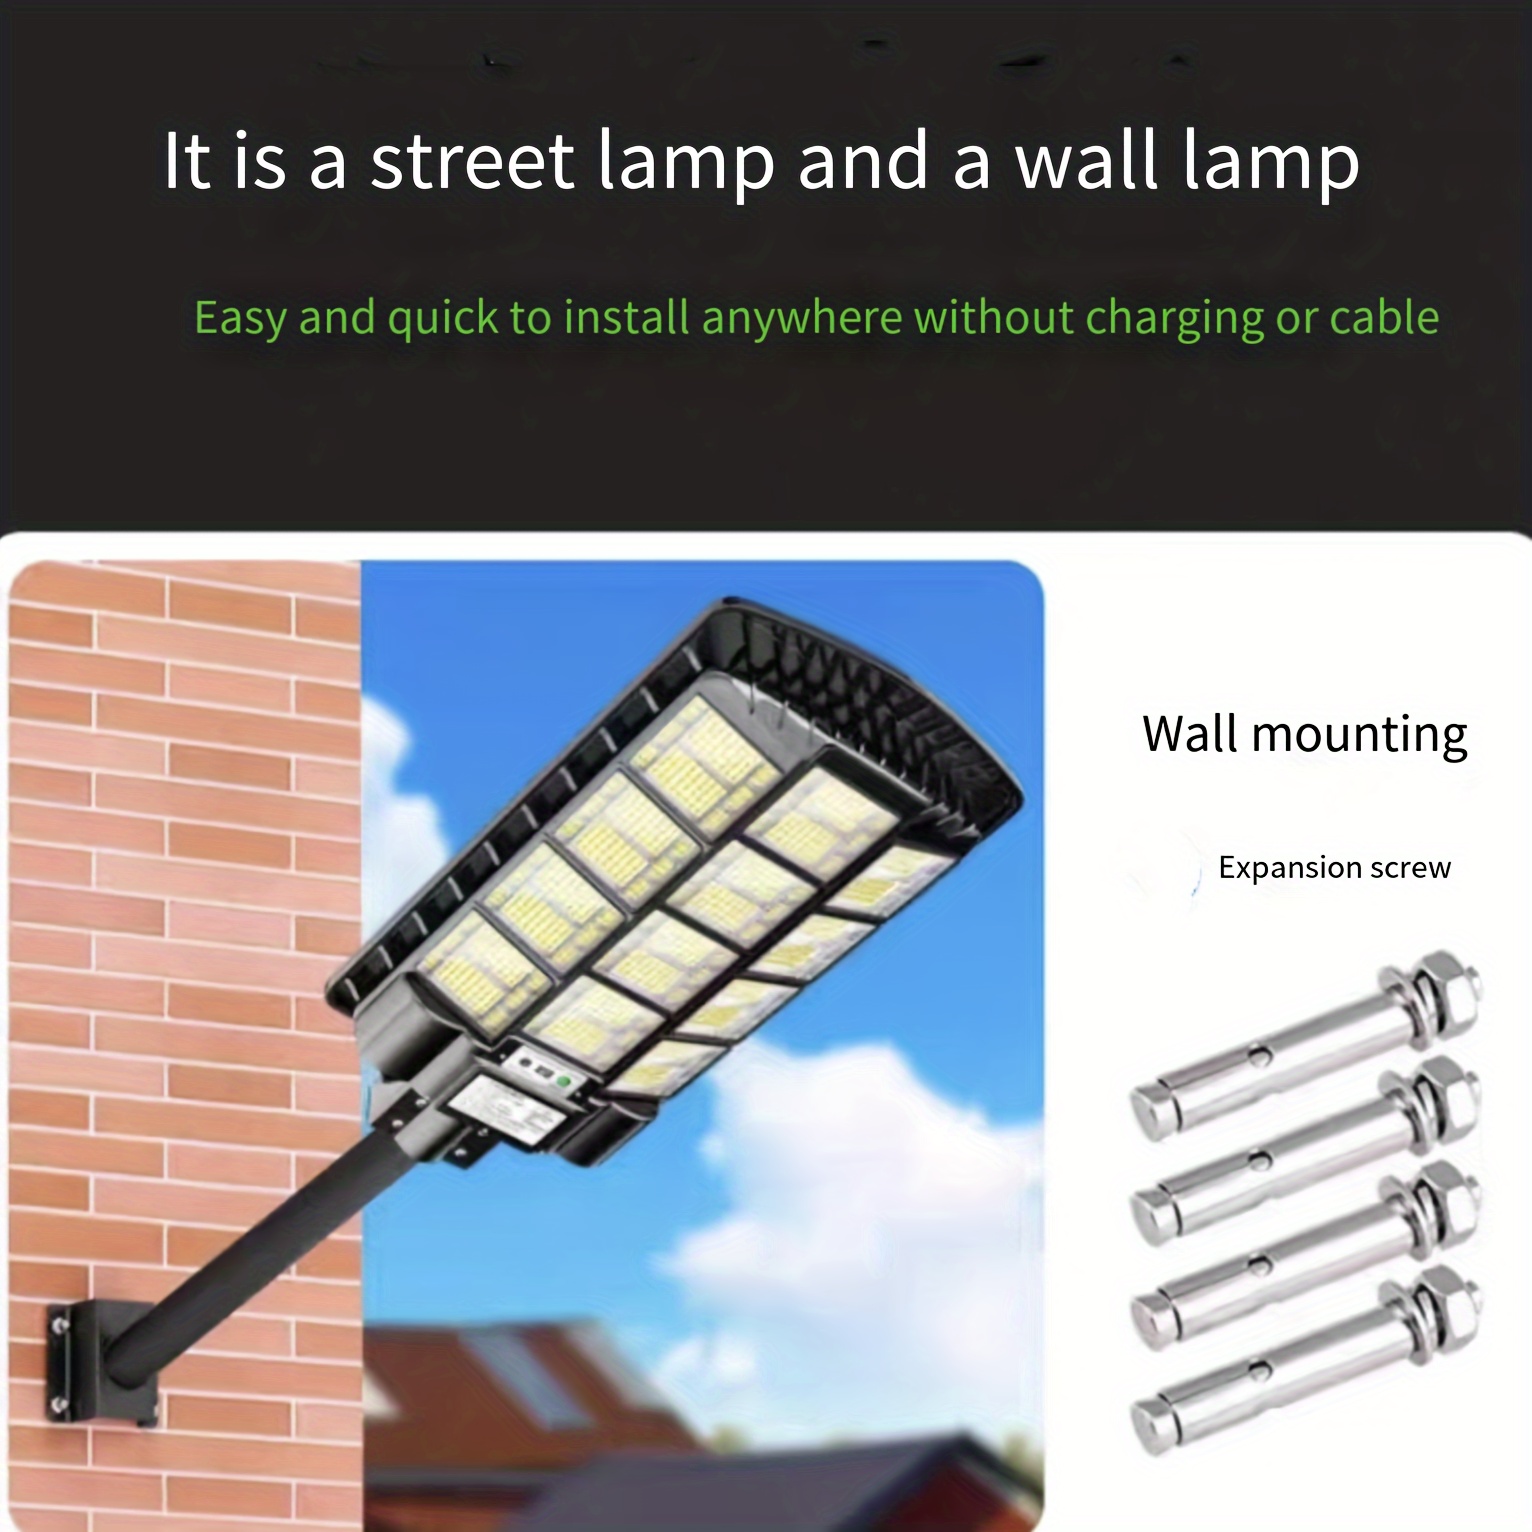 1pc high power integrated solar lamp human body induction light control remote control high brightness led large lamp beads irradiation area up to 300 square meters suitable for courtyards parks roads farms free bracket wall parts package details 5